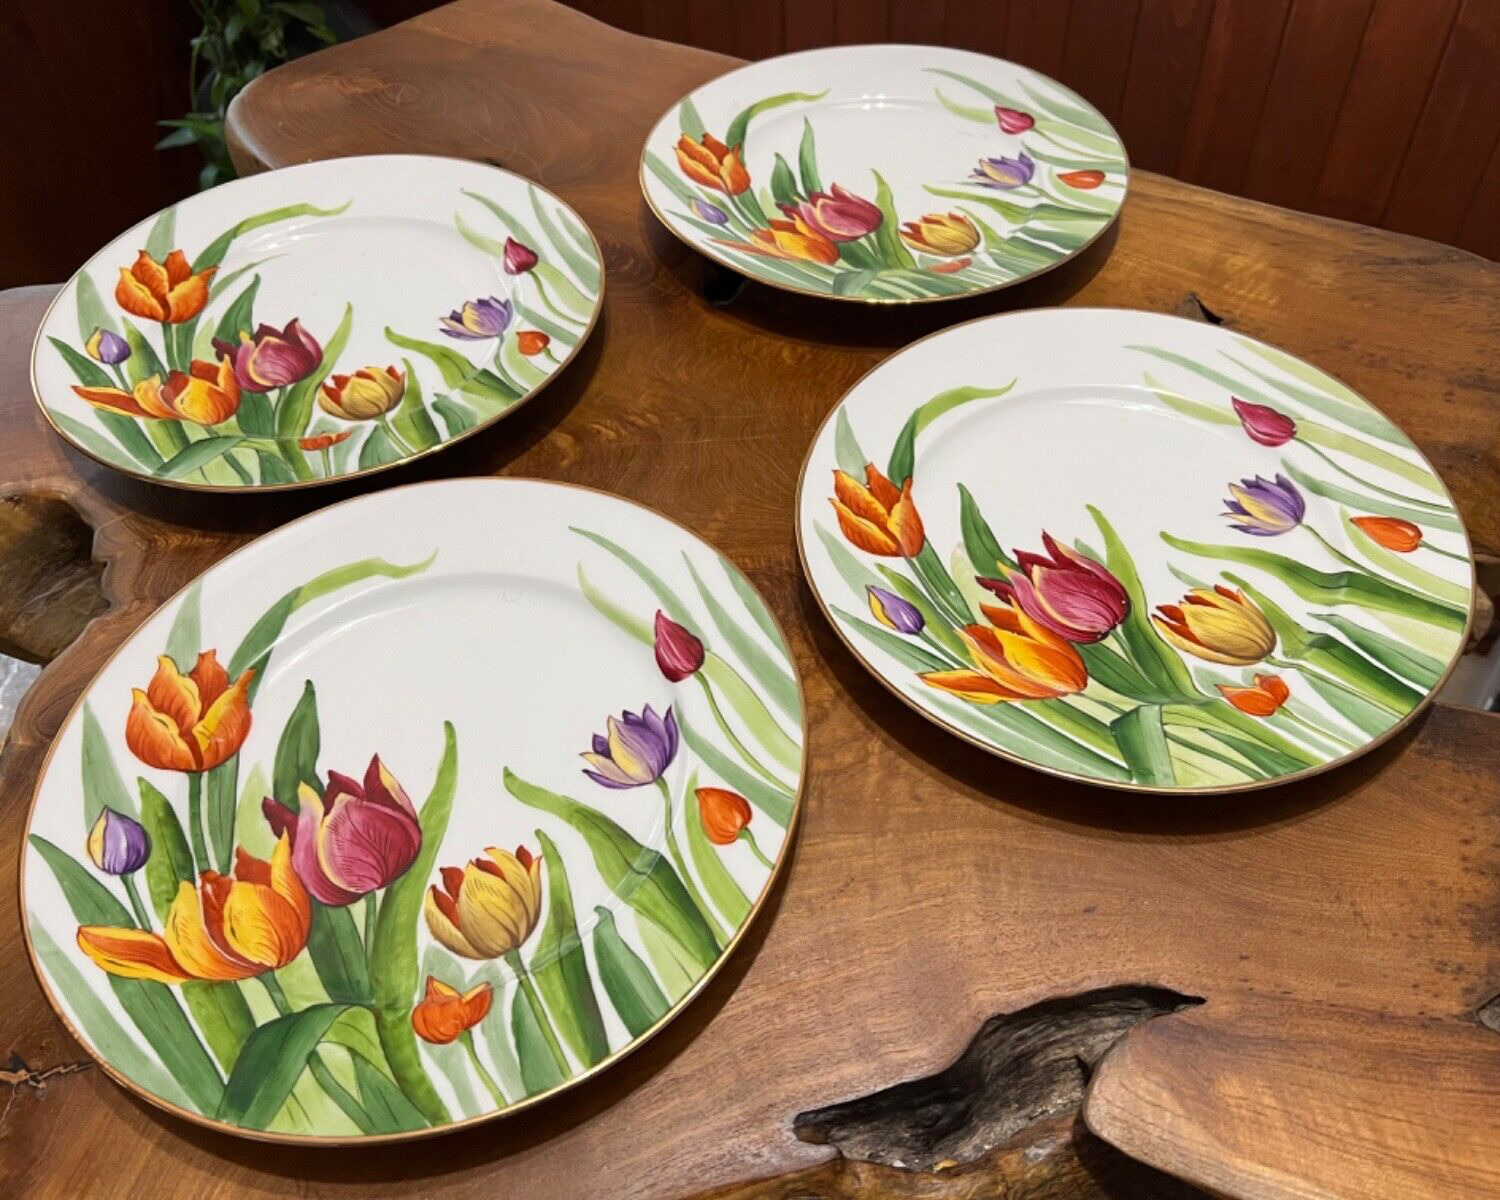 Set of 7 Antique Saxe Charles Ahrenfeldt Porcelain Plates Hand Painted Tulips